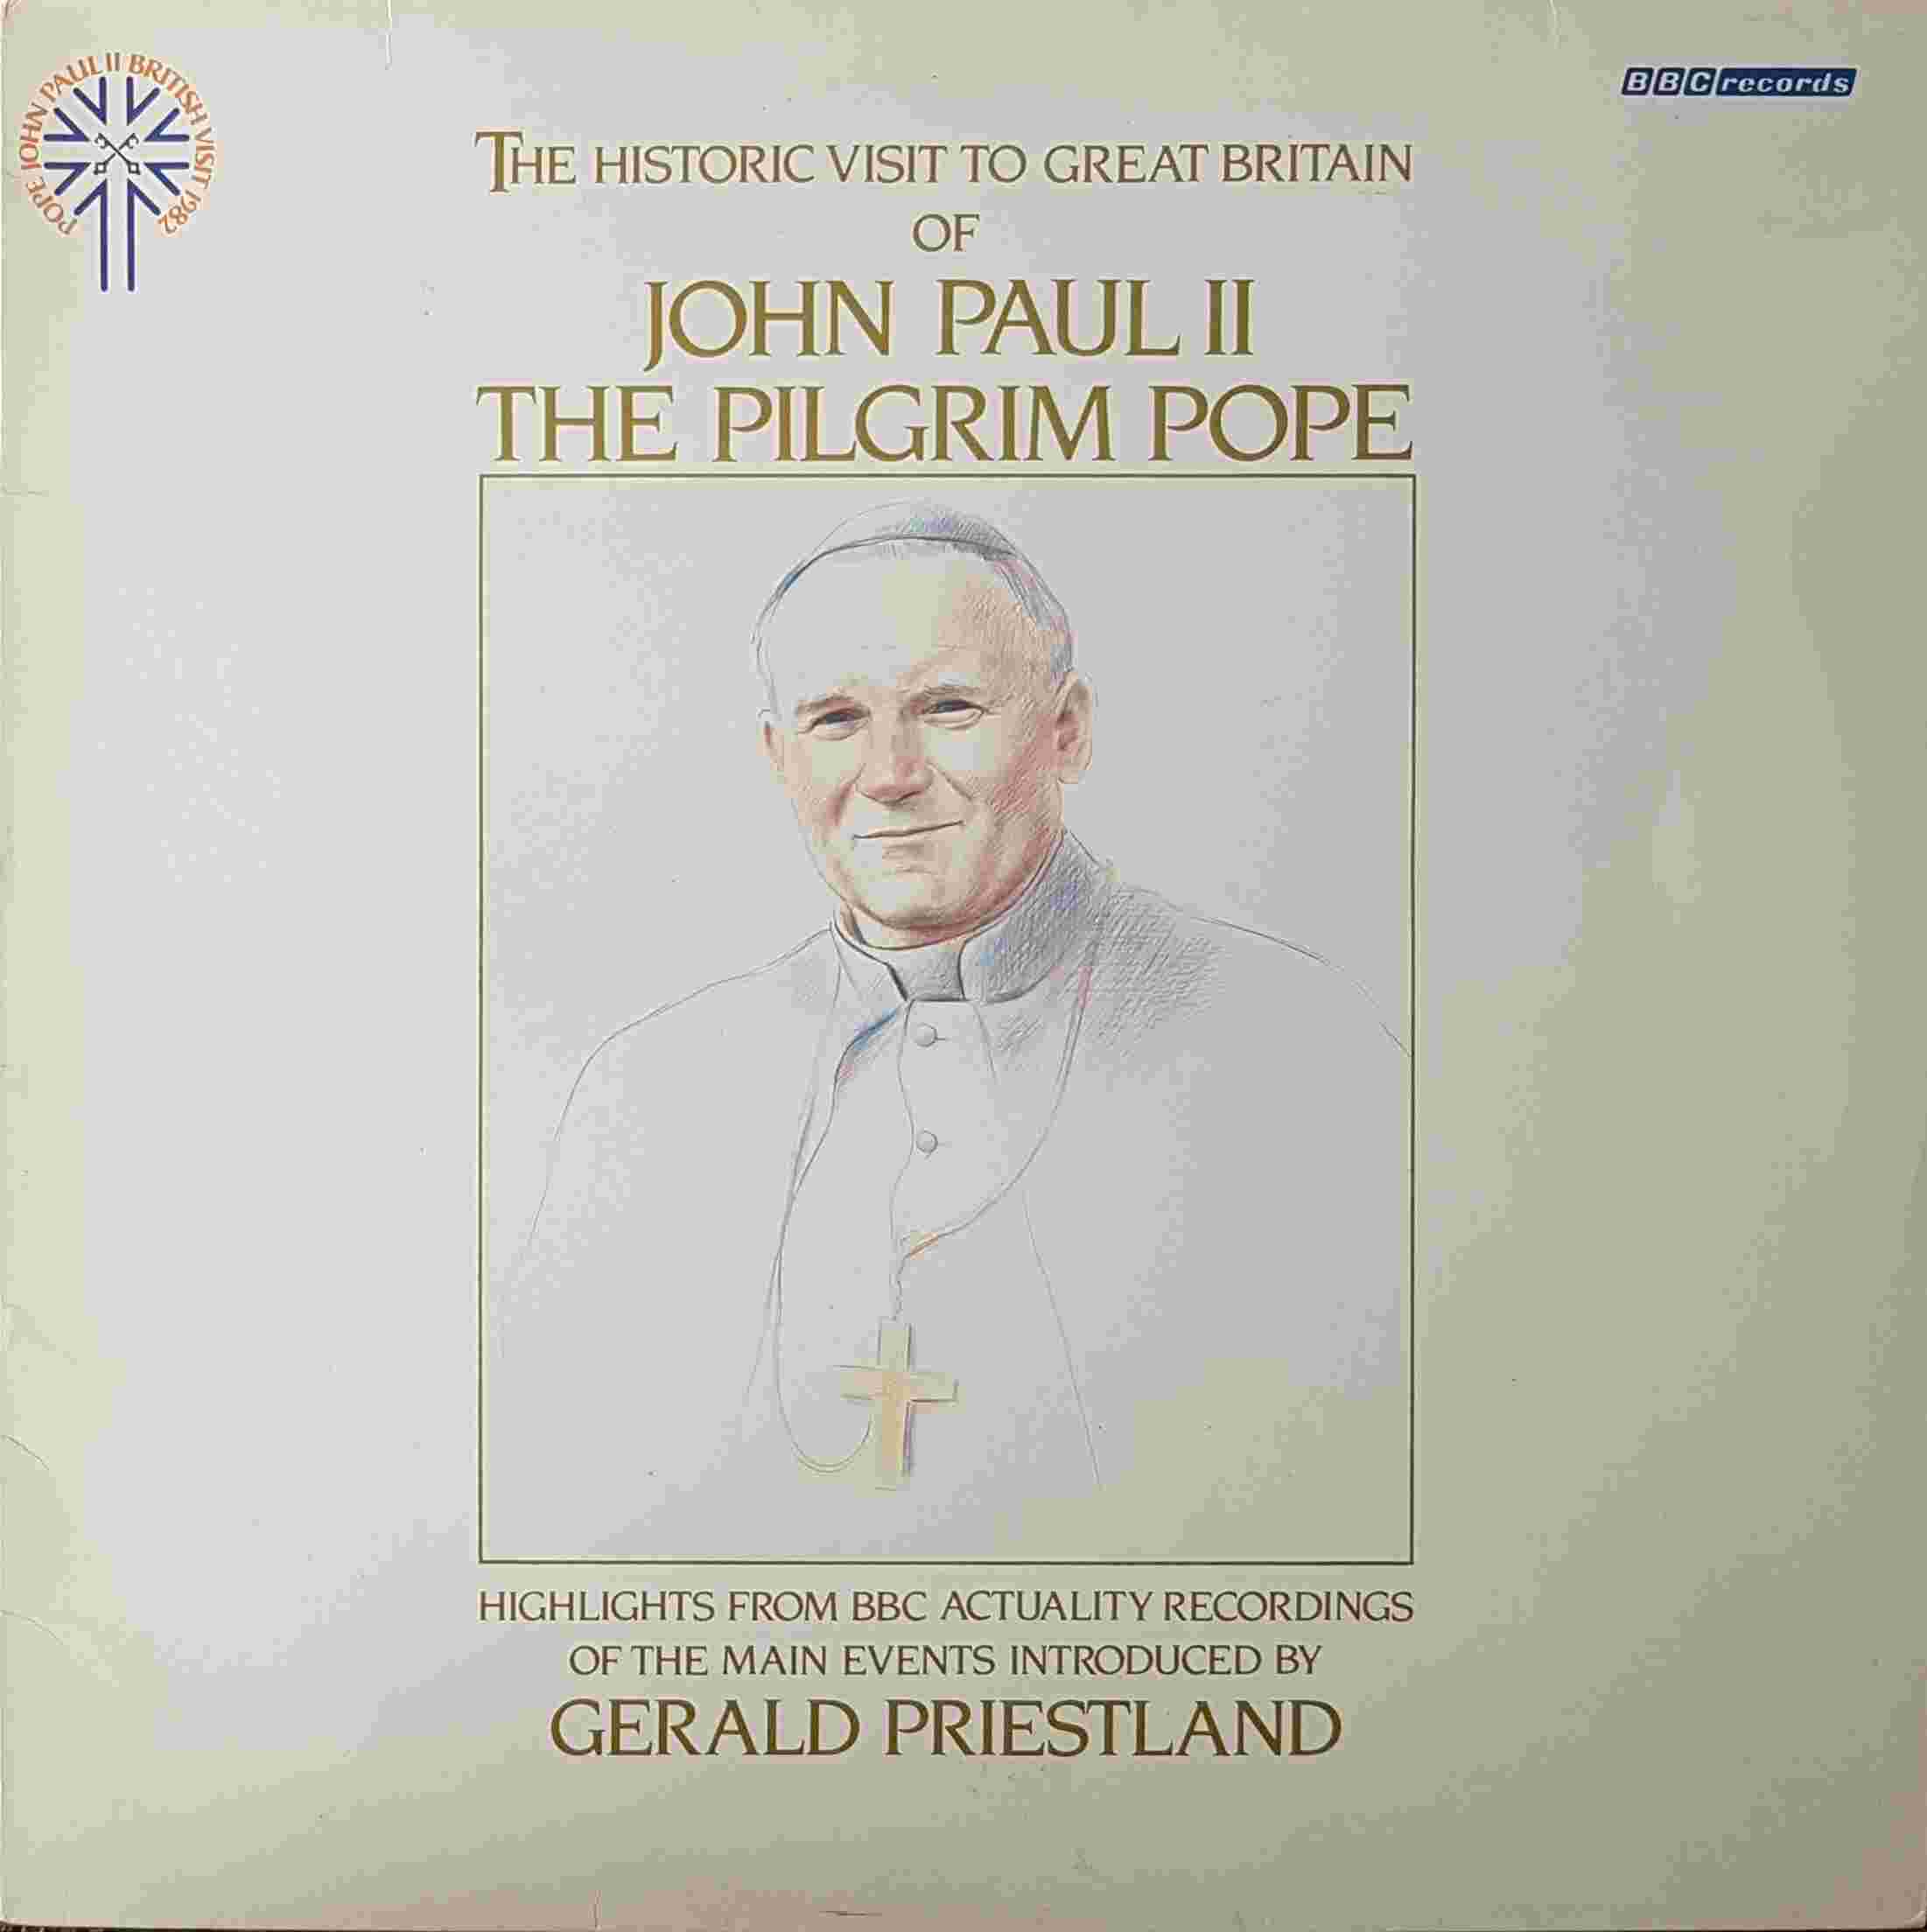 Picture of REB 445 John Paul II, the pilgrim pope by artist Various from the BBC albums - Records and Tapes library